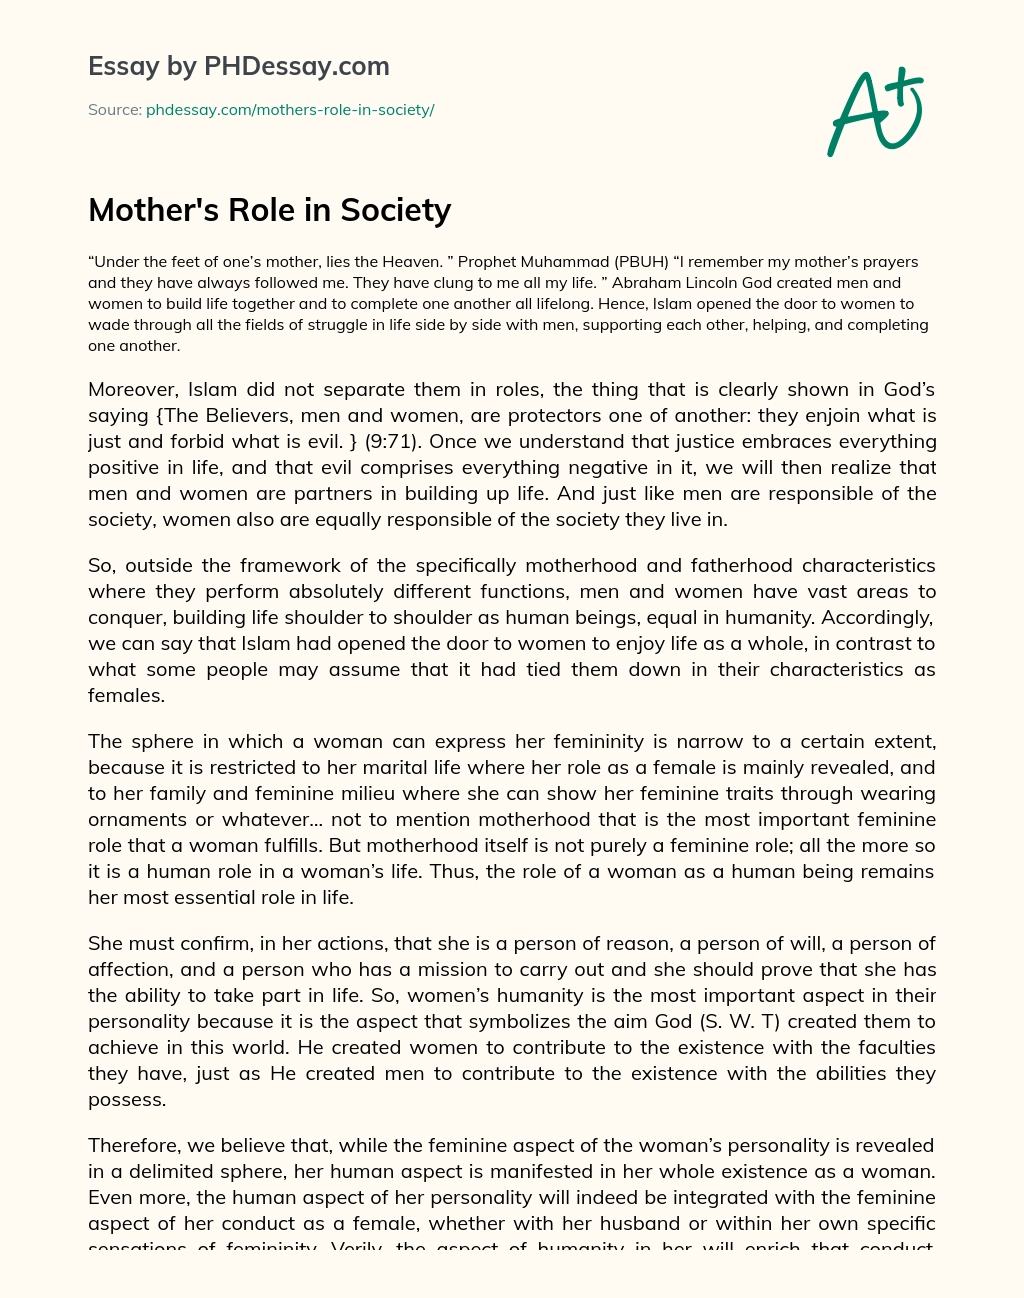 Mother’s Role in Society essay